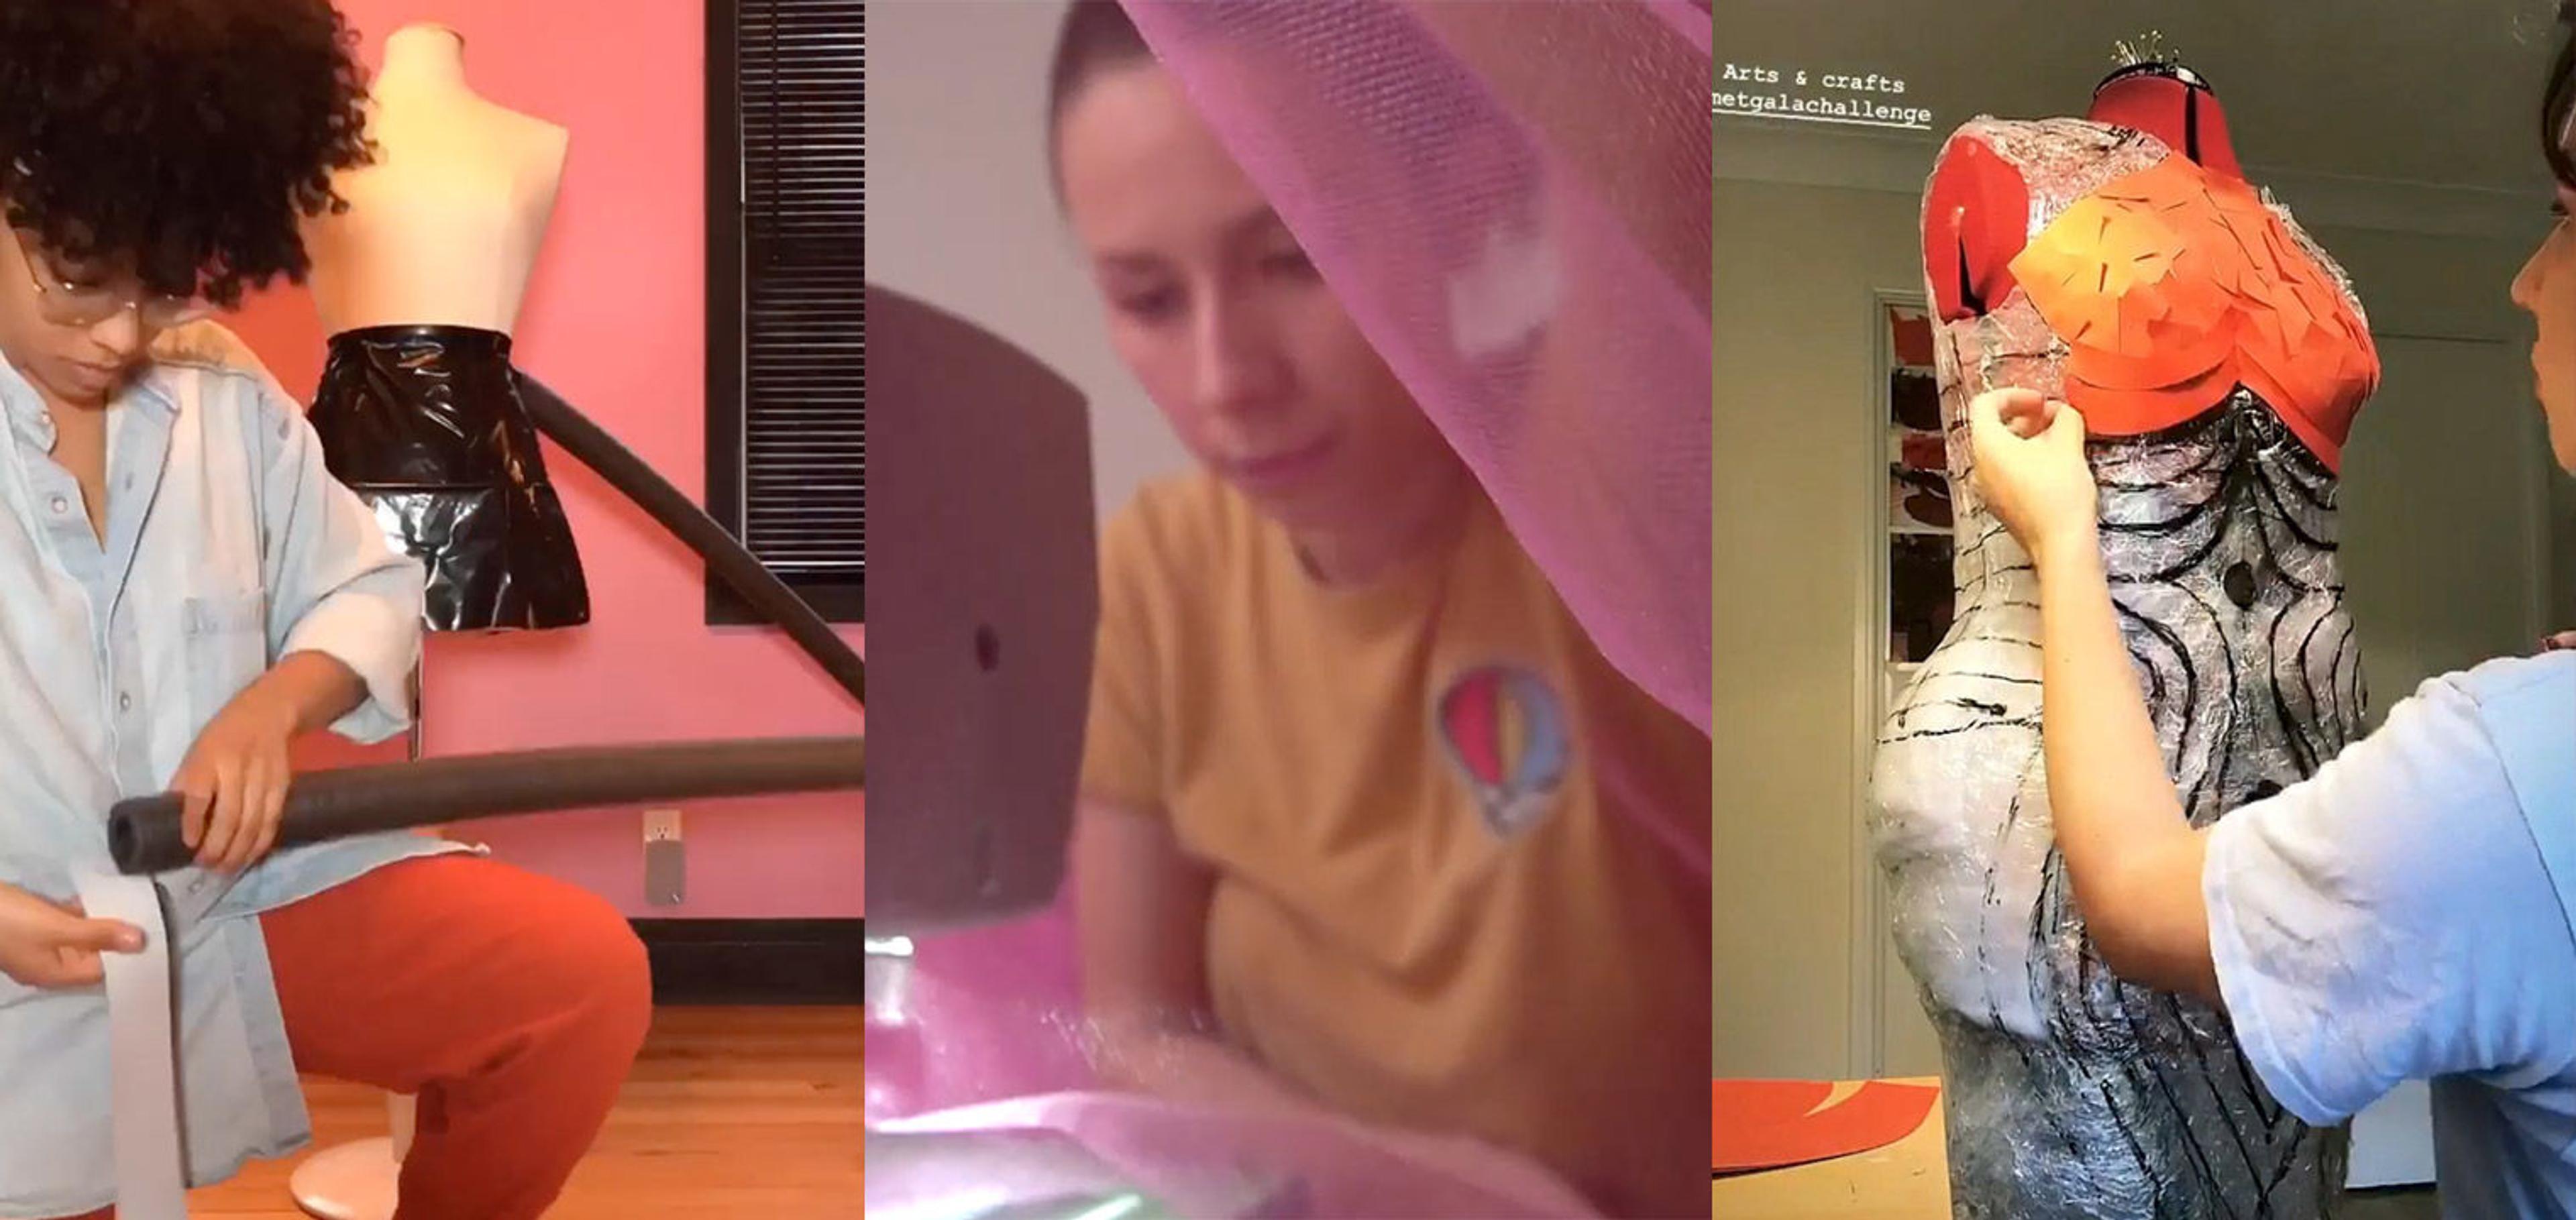 Composite image of three women DIY’ing dresses; on the left a woman kneels on one leg in front of her dress-making form while wrapping tape around a grey styrofoam tube; in the middle a woman’s face is veiled by the sheer pink tulle as she passes it through a sewing machine; on the right a woman applies red paper cut-outs to the bodice of a dress form.